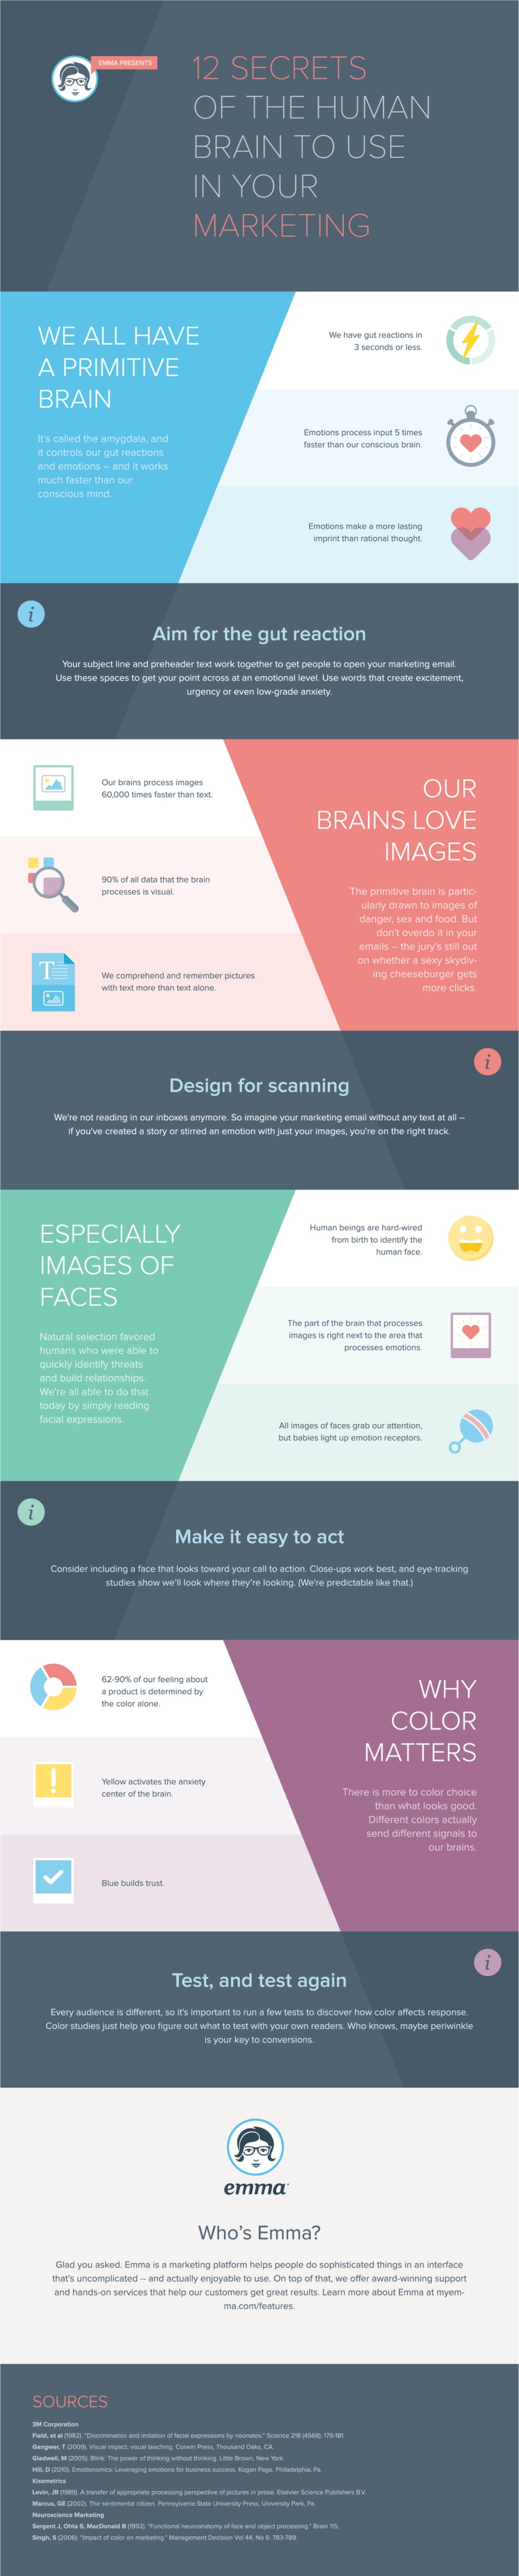 12 Secrets Of The Human Brain To Use In Your Digital Marketing - #infographic - Digital Information World | The MarTech Digest | Scoop.it